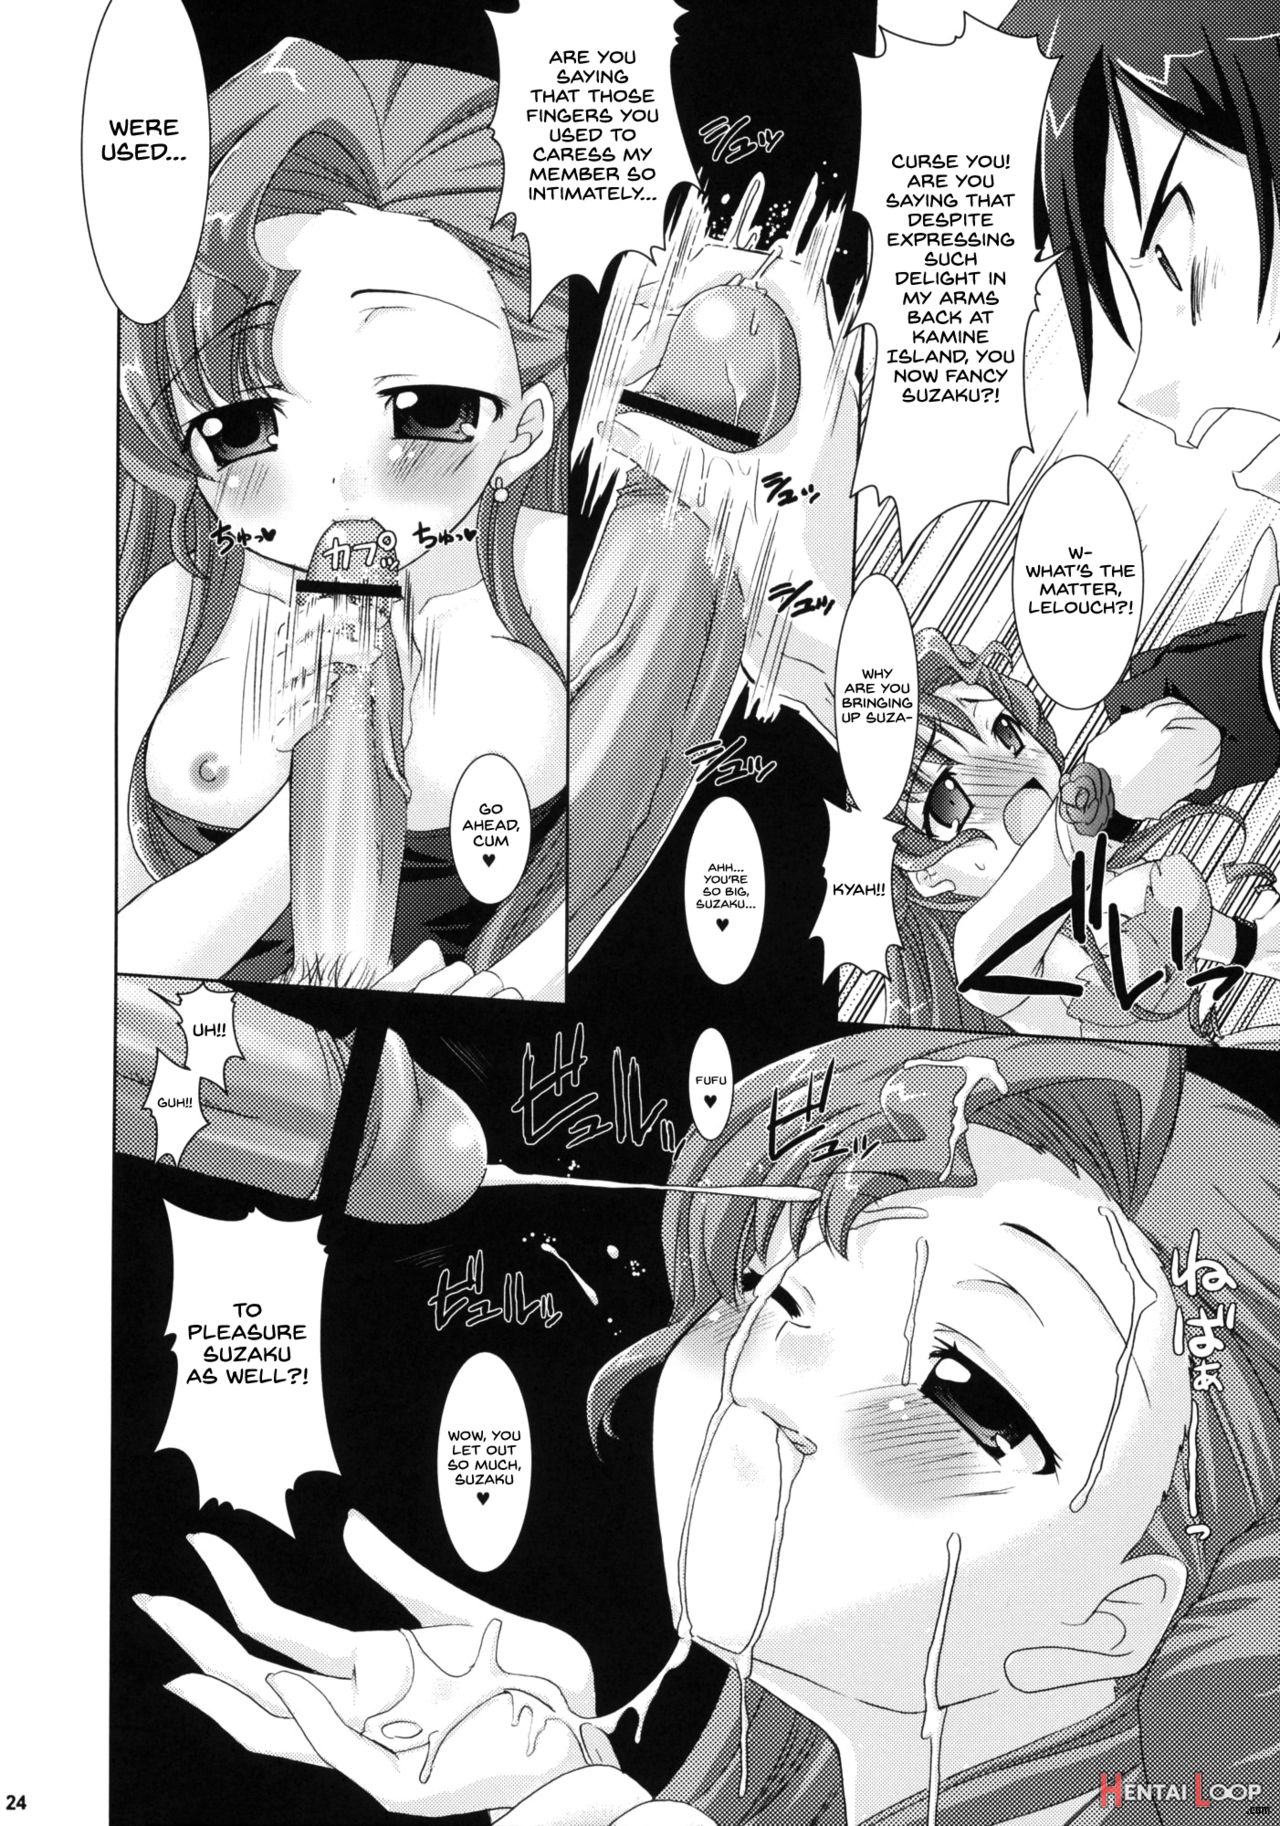 Kouhime Kyouhime page 24